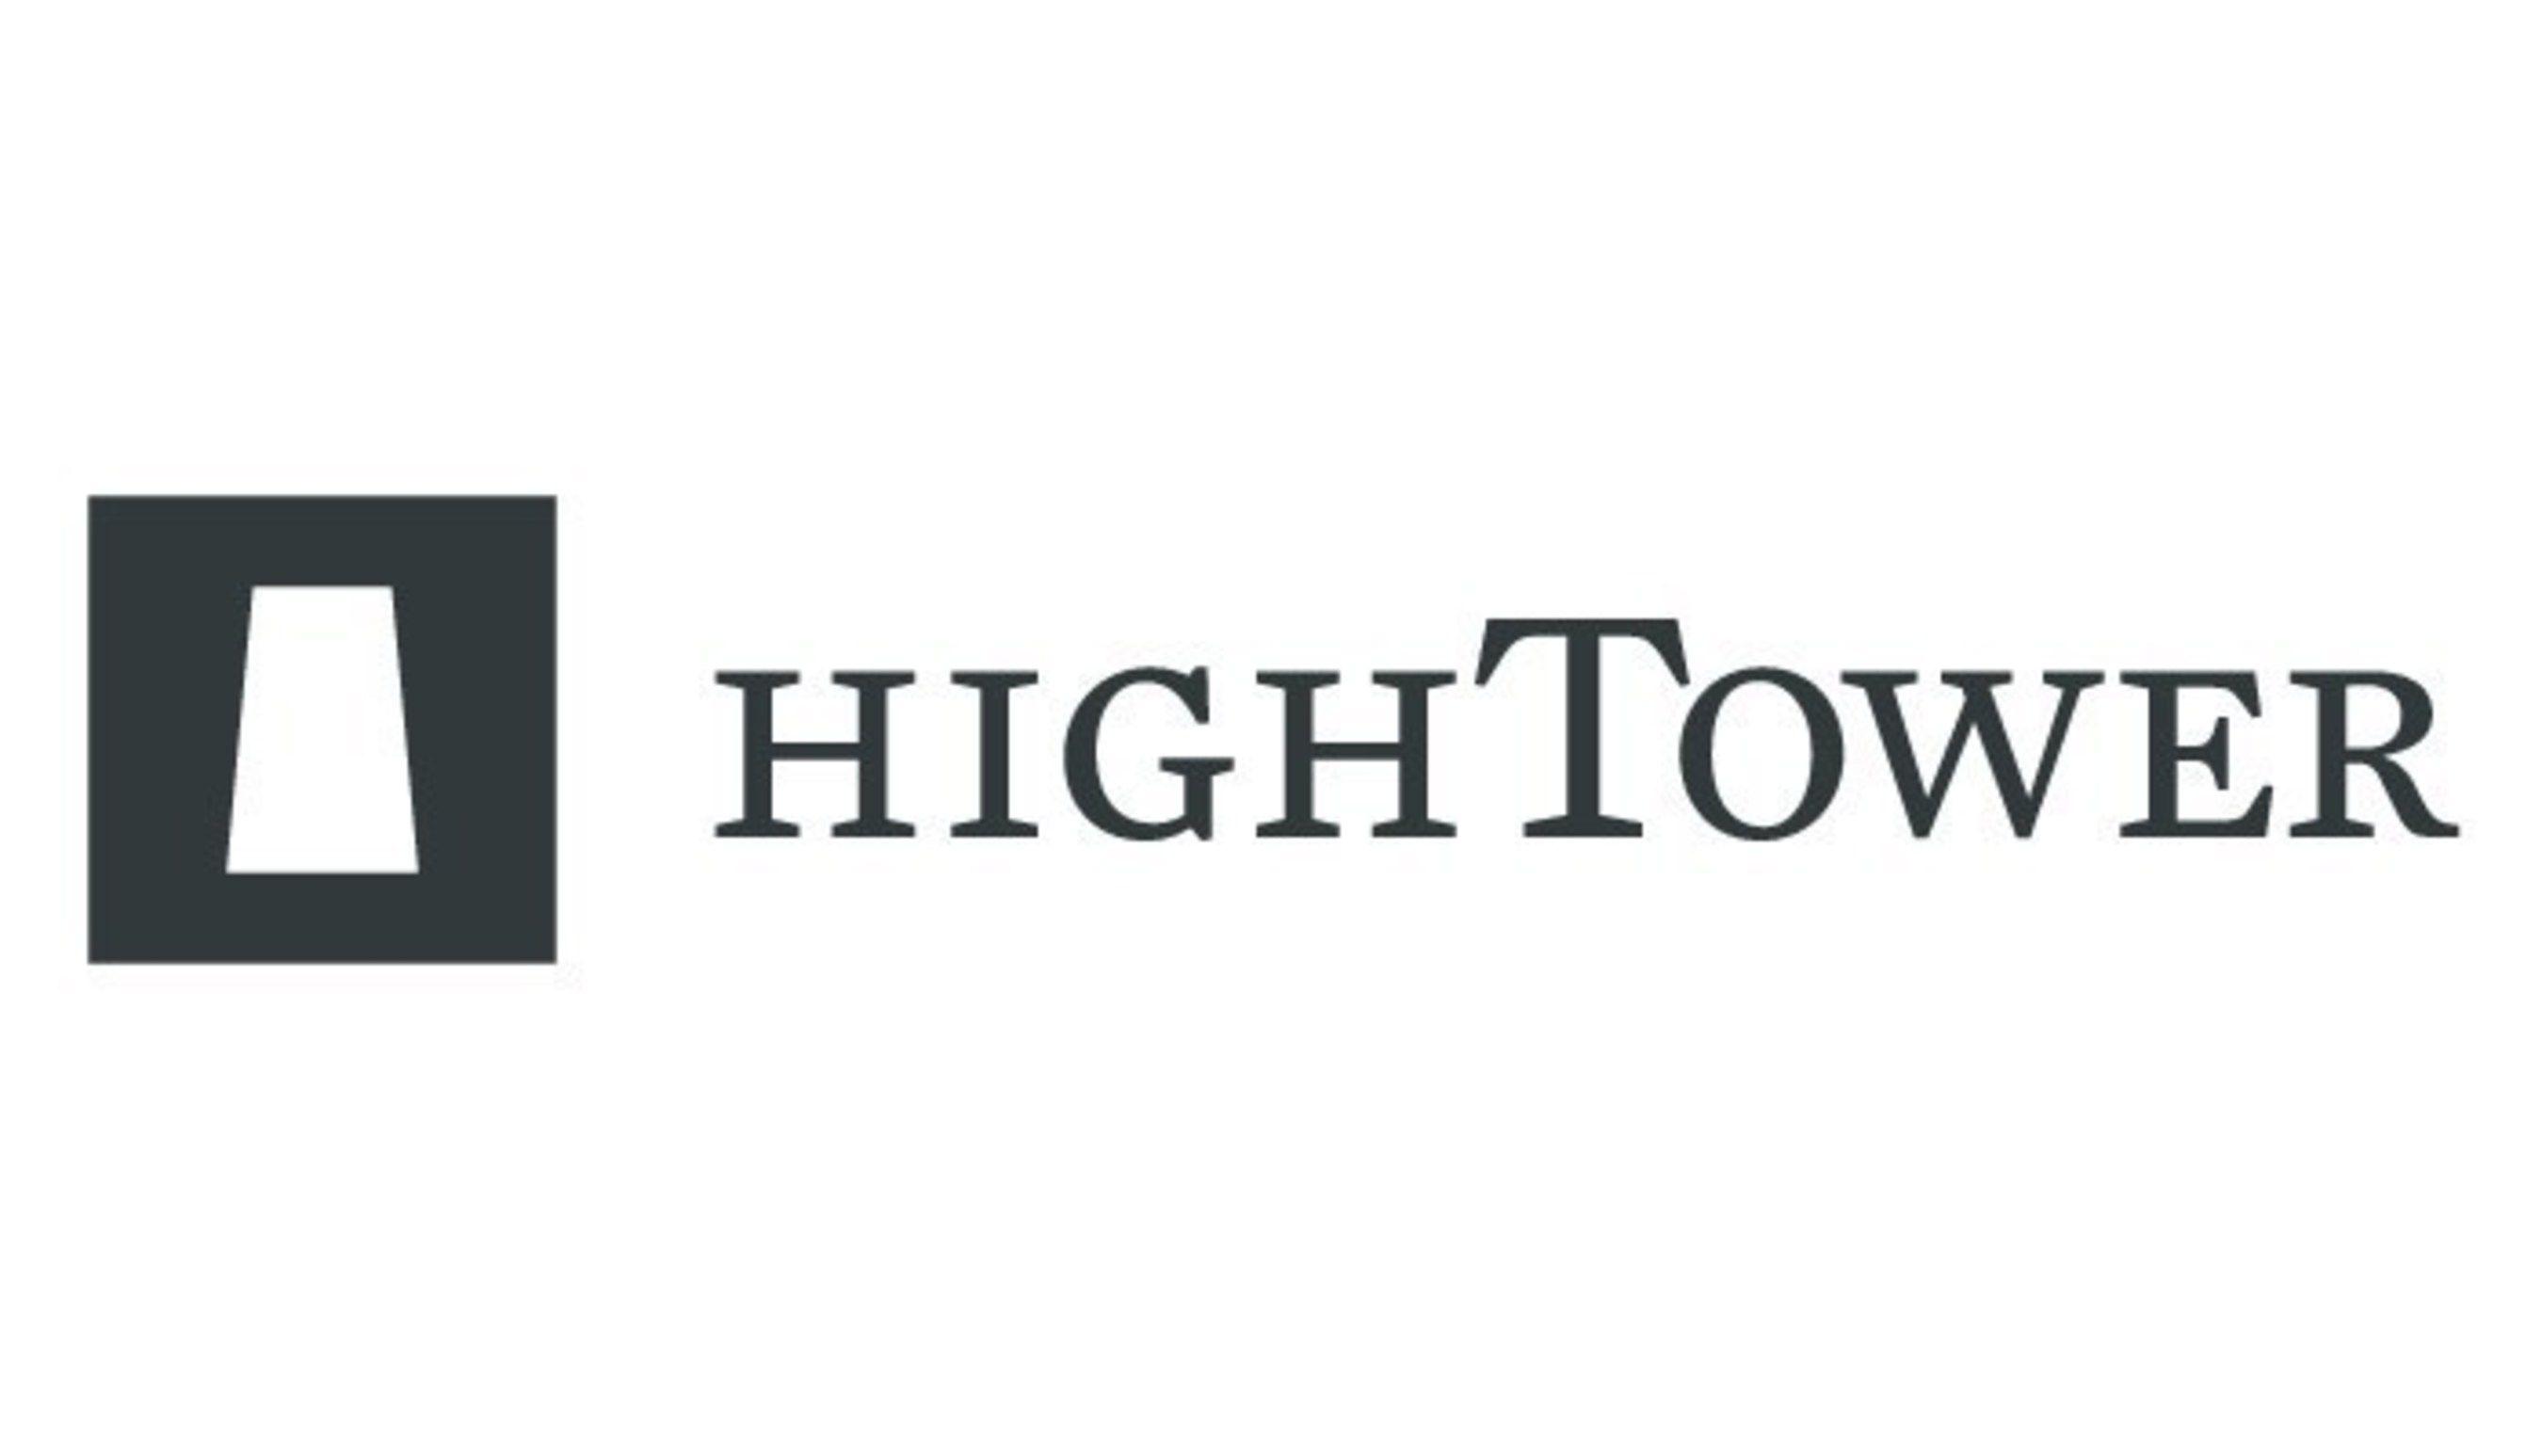 Hightower Logo - HighTower to Acquire WealthTrust from Lee Equity Partners, Adding